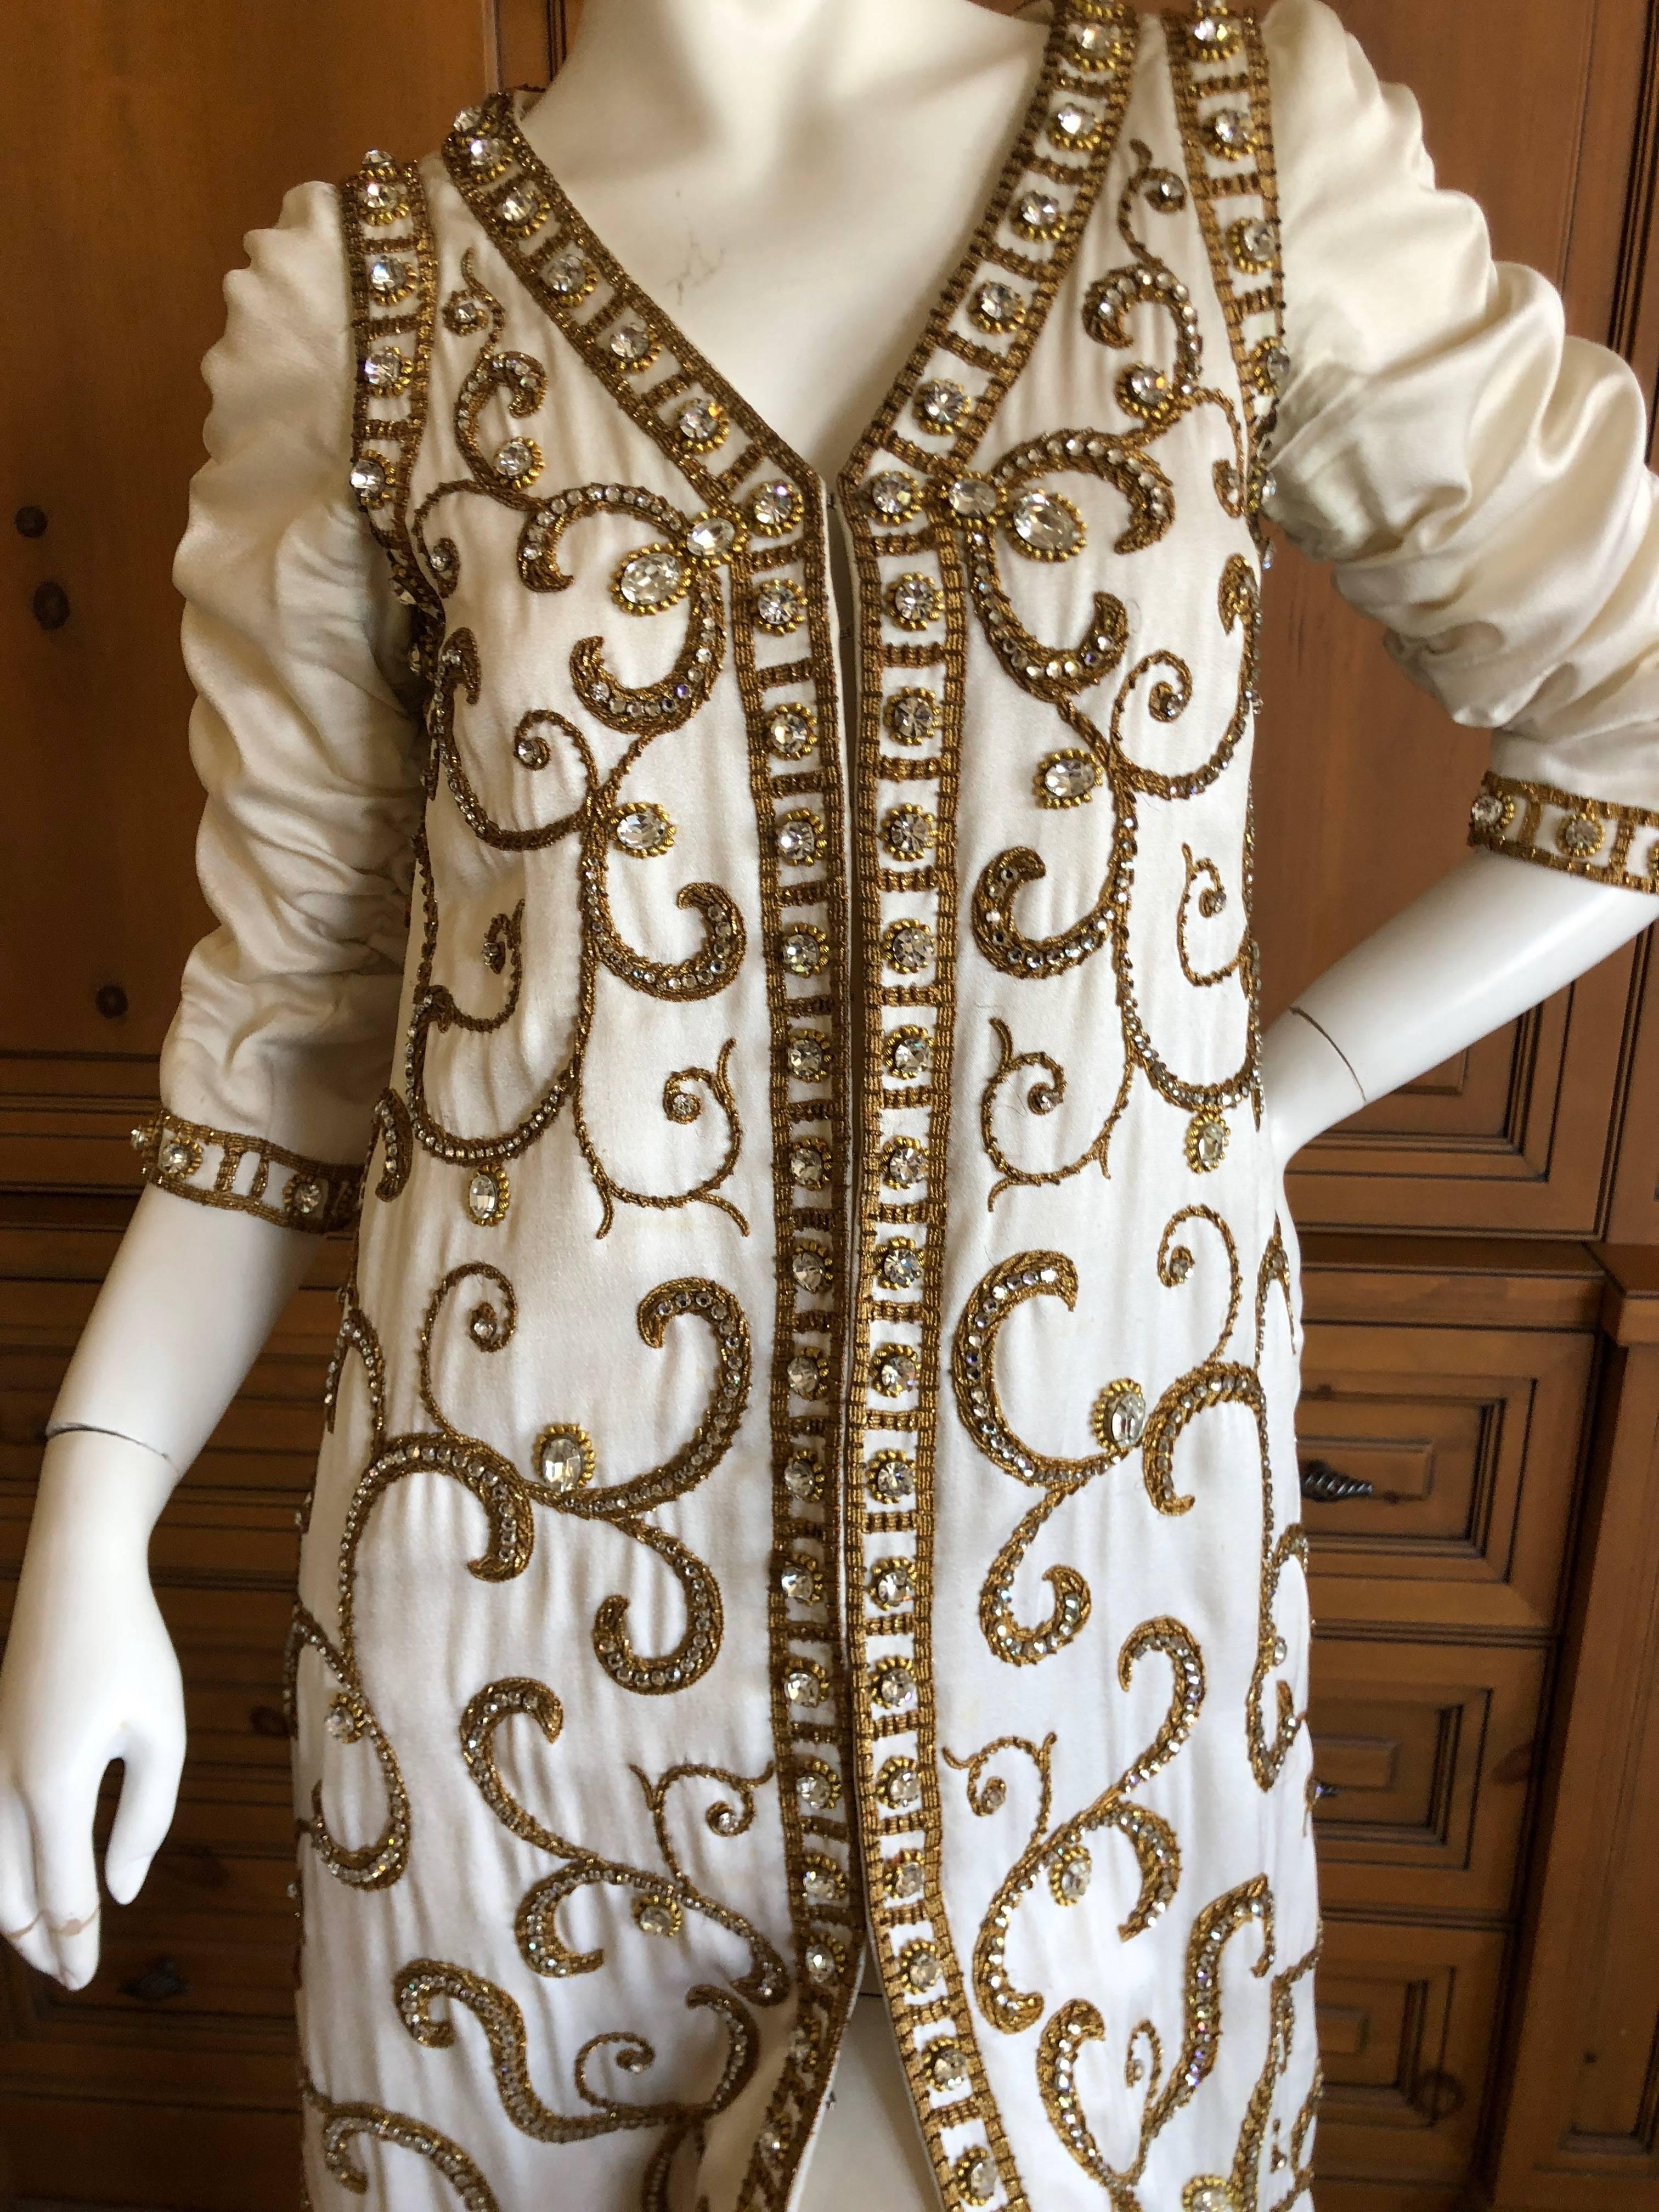 Cardinali Showstopping 1970 Arabesque Crystal Embellished Evening Coat Dress.
Ivory silk evening coat richly embellished with an arabesque pattern in goldwork embroidery and  crystals.
Please use the zoom feature to see all the details, it is quite